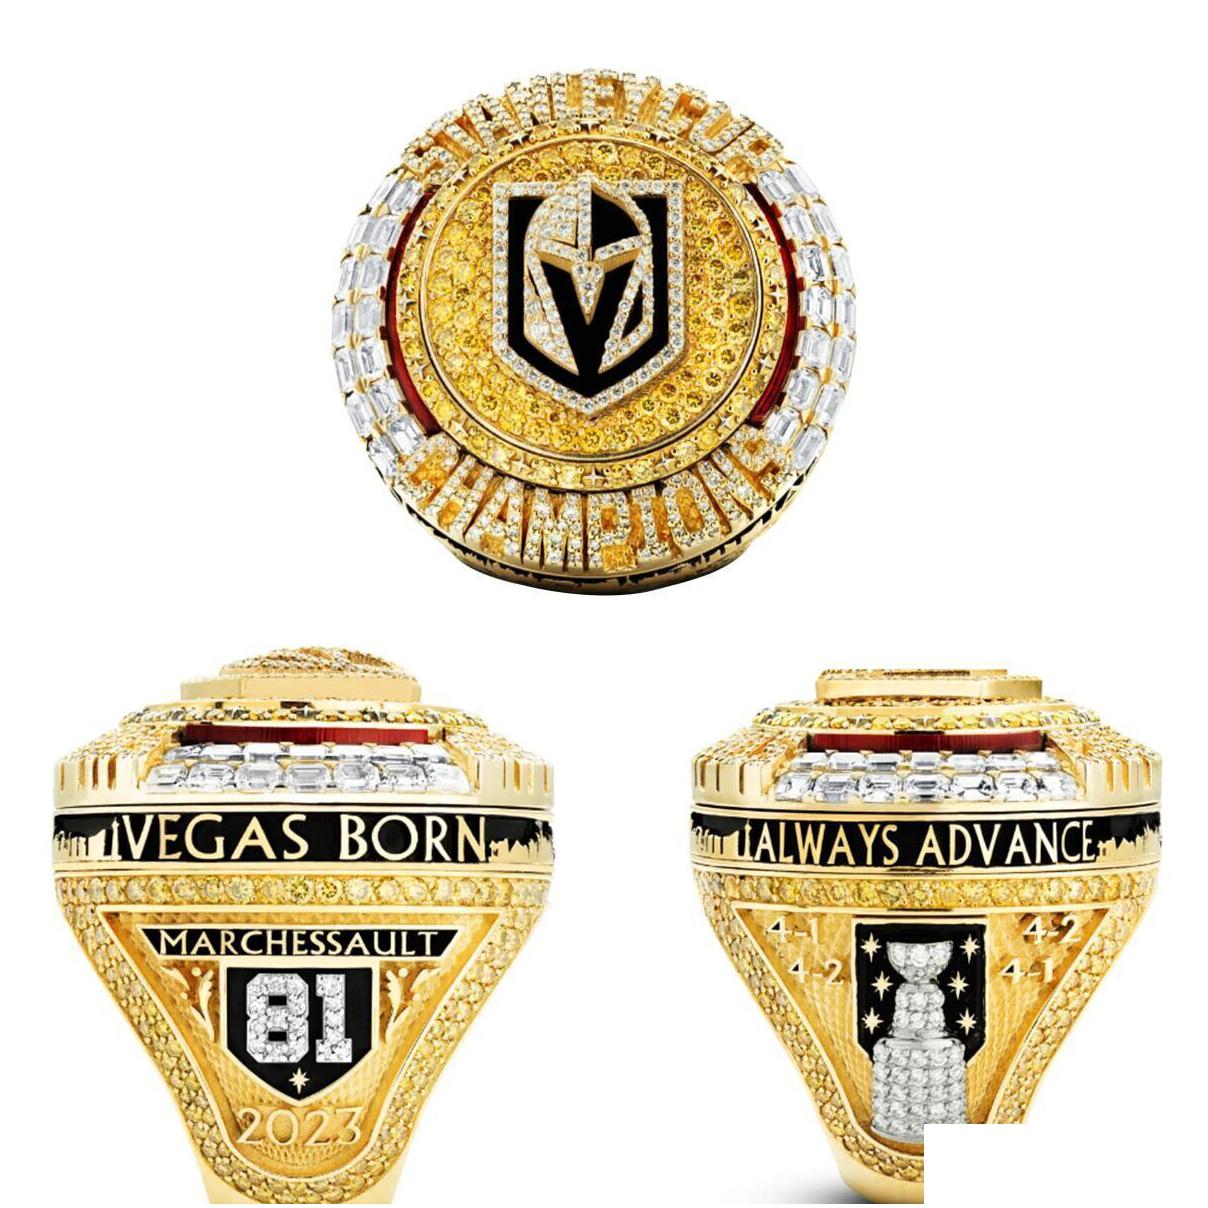 2022 2023 golden knights cup team champions championship ring with wooden display box souvenir men fan gift drop 